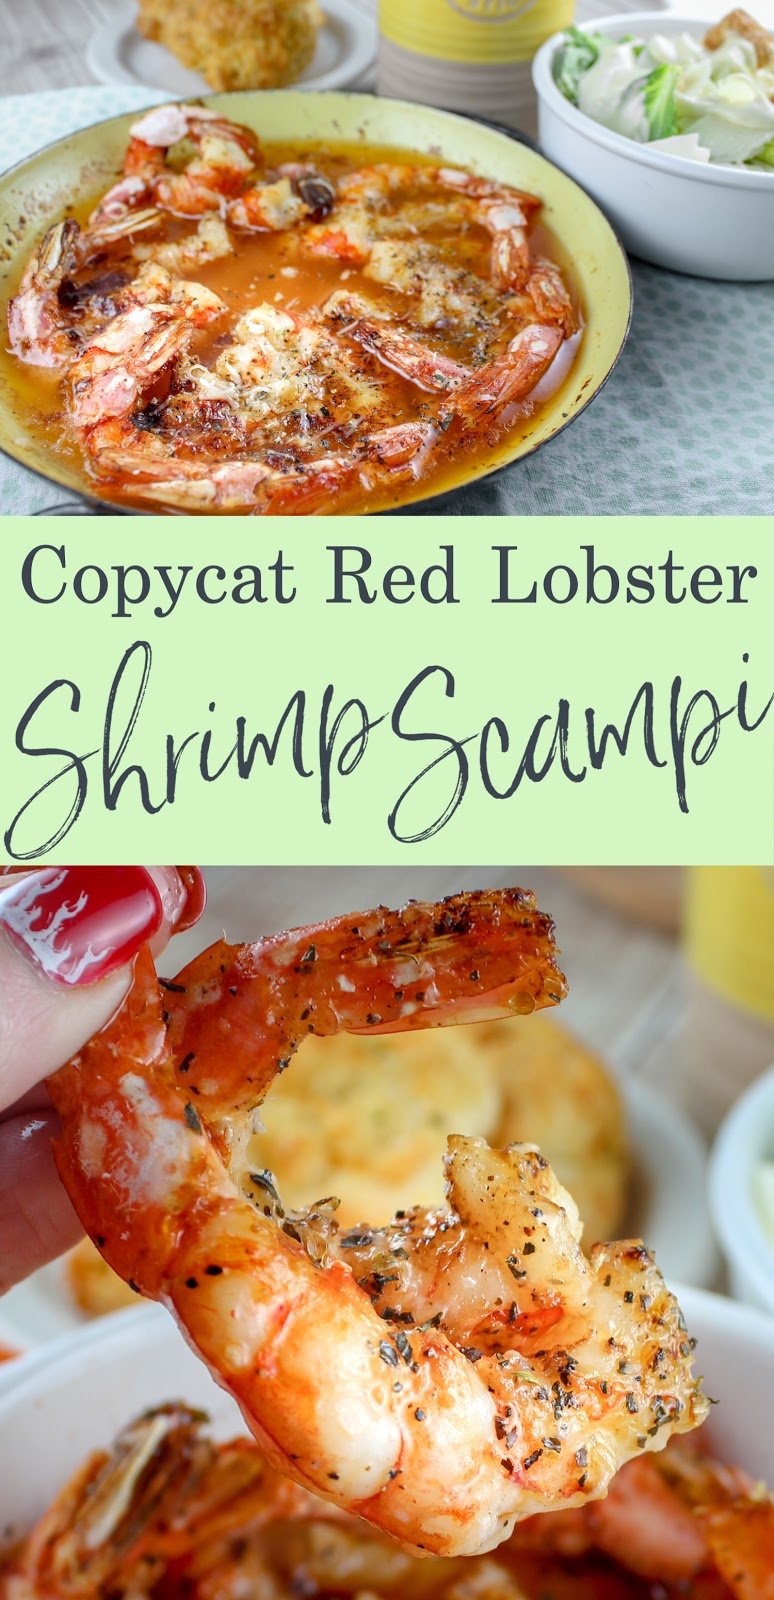 Red Lobster’s Shrimp Scampi has always been one of my favorite dishes and I can’t believe HOW EASY it is to make at home!!!! This copycat version is spot on – and so simple! via @foodhussy